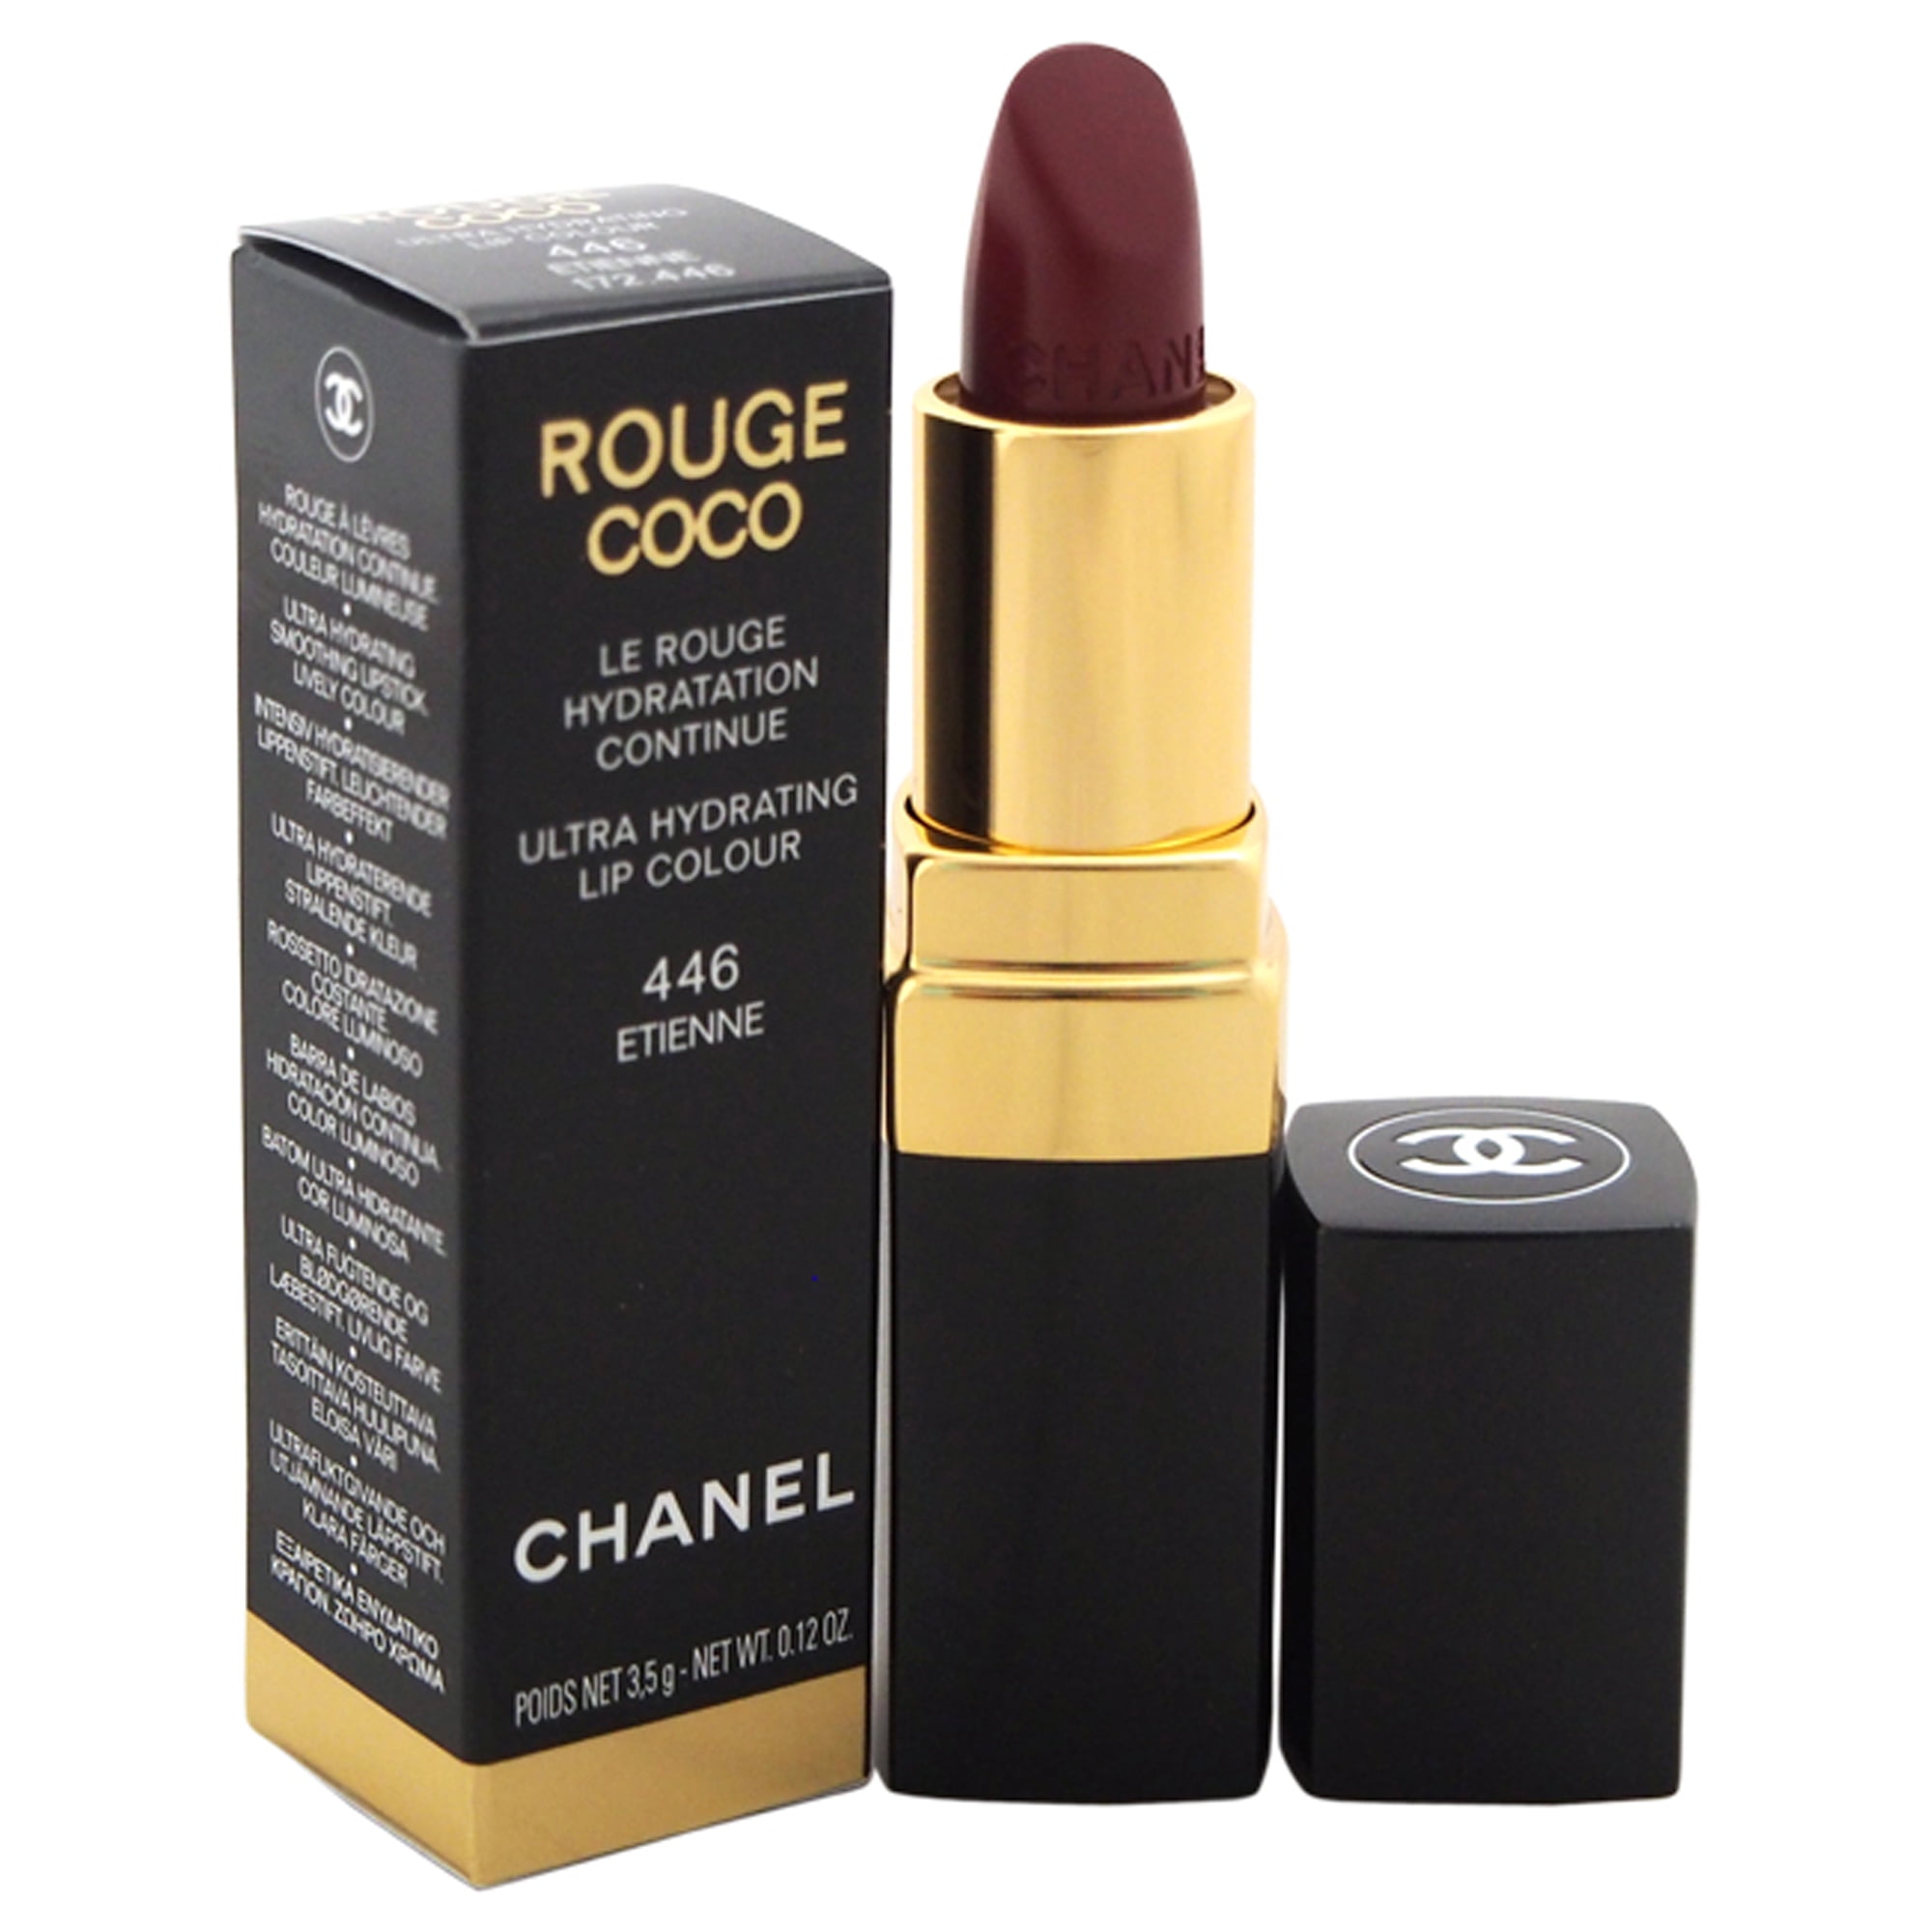 My most loved lipsticks: CHANEL ROUGE COCO SHINE #48 EVASION and